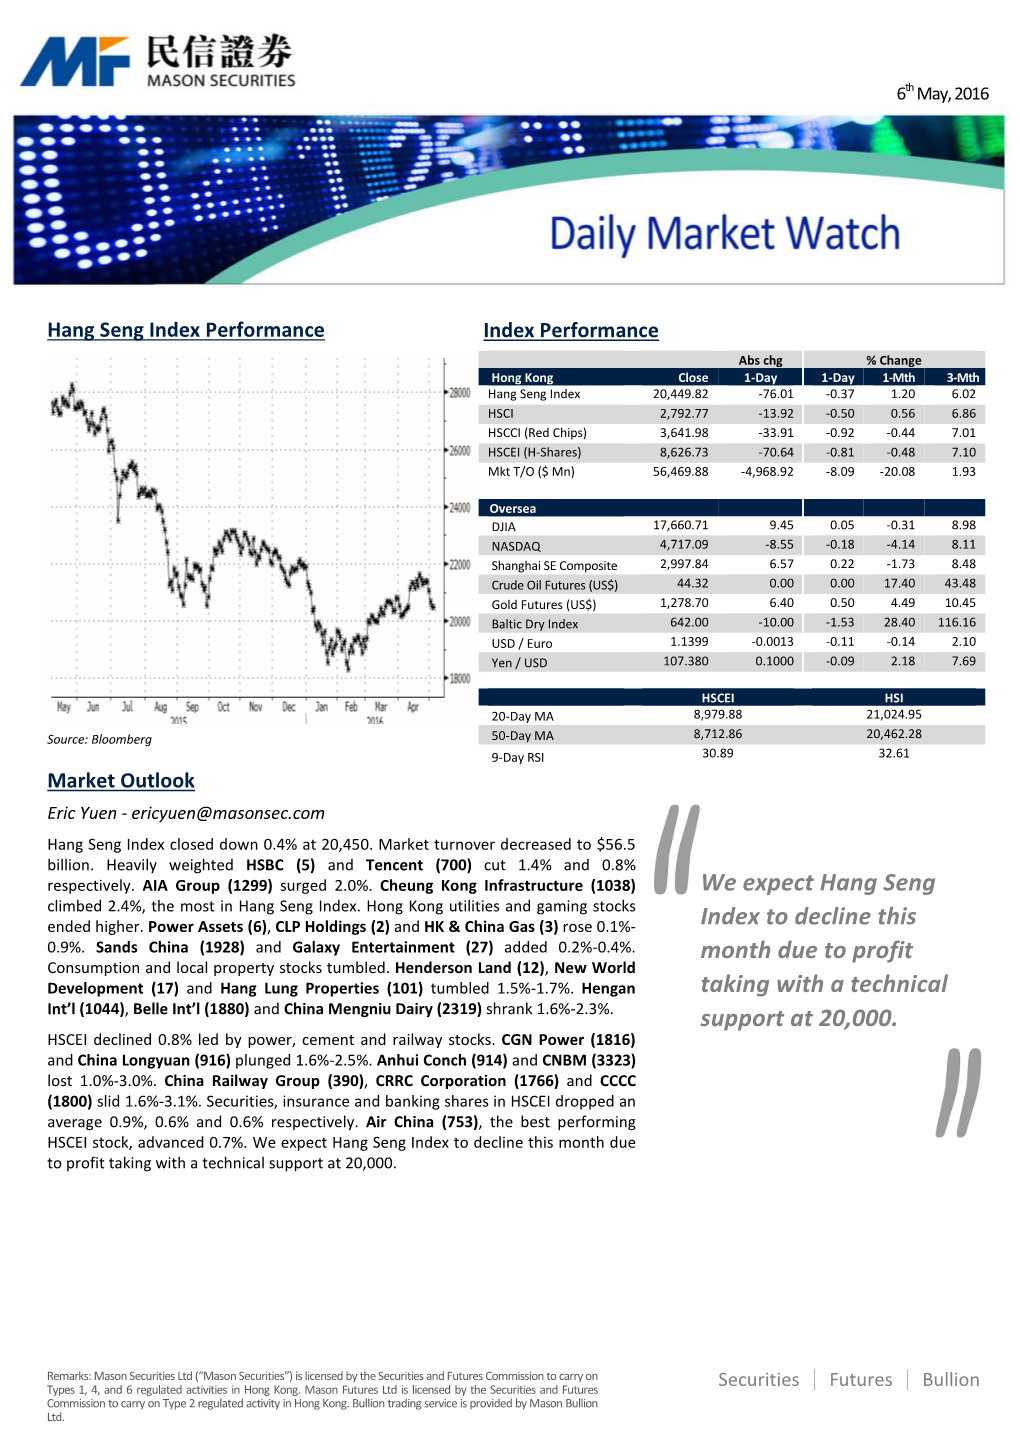 We Expect Hang Seng Index to Decline This Month Due to Profit Taking with a Technical Support at 20,000